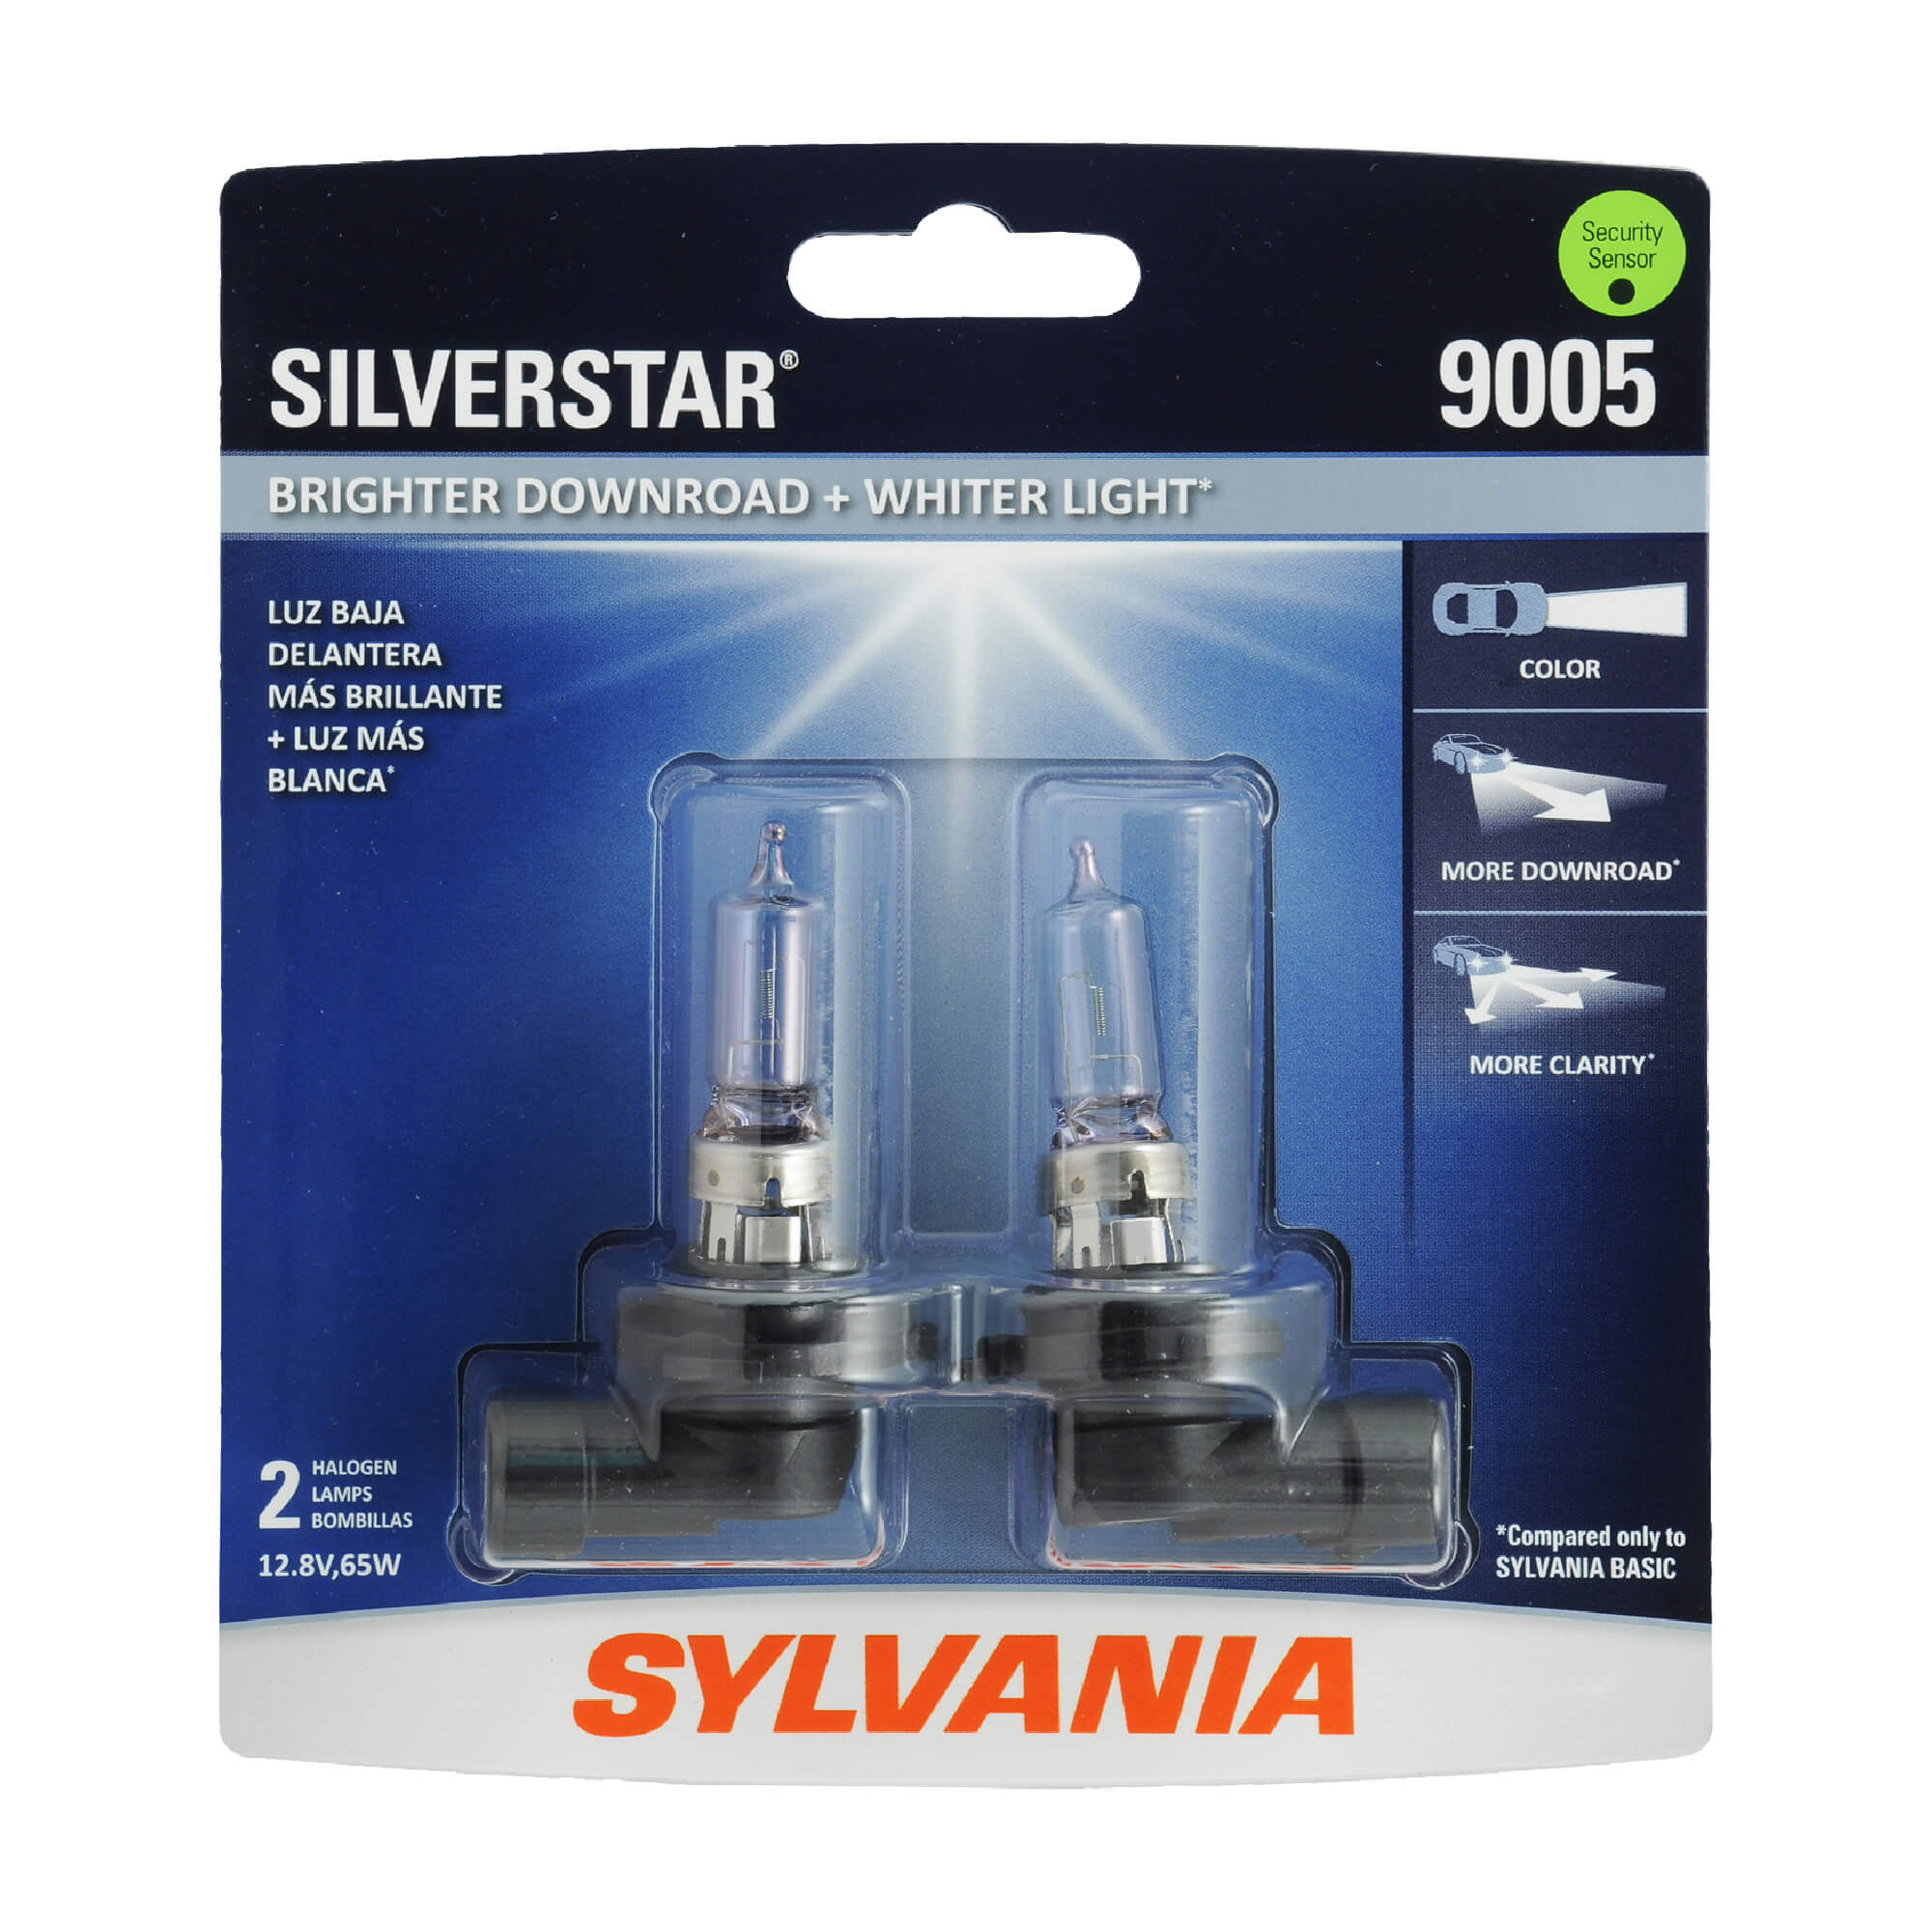 High Performance Halogen Headlight Bulb 9005 SilverStar Low Beam and Fog Replacement Bulb Brighter Downroad with Whiter Light SYLVANIA High Beam Contains 2 Bulbs 